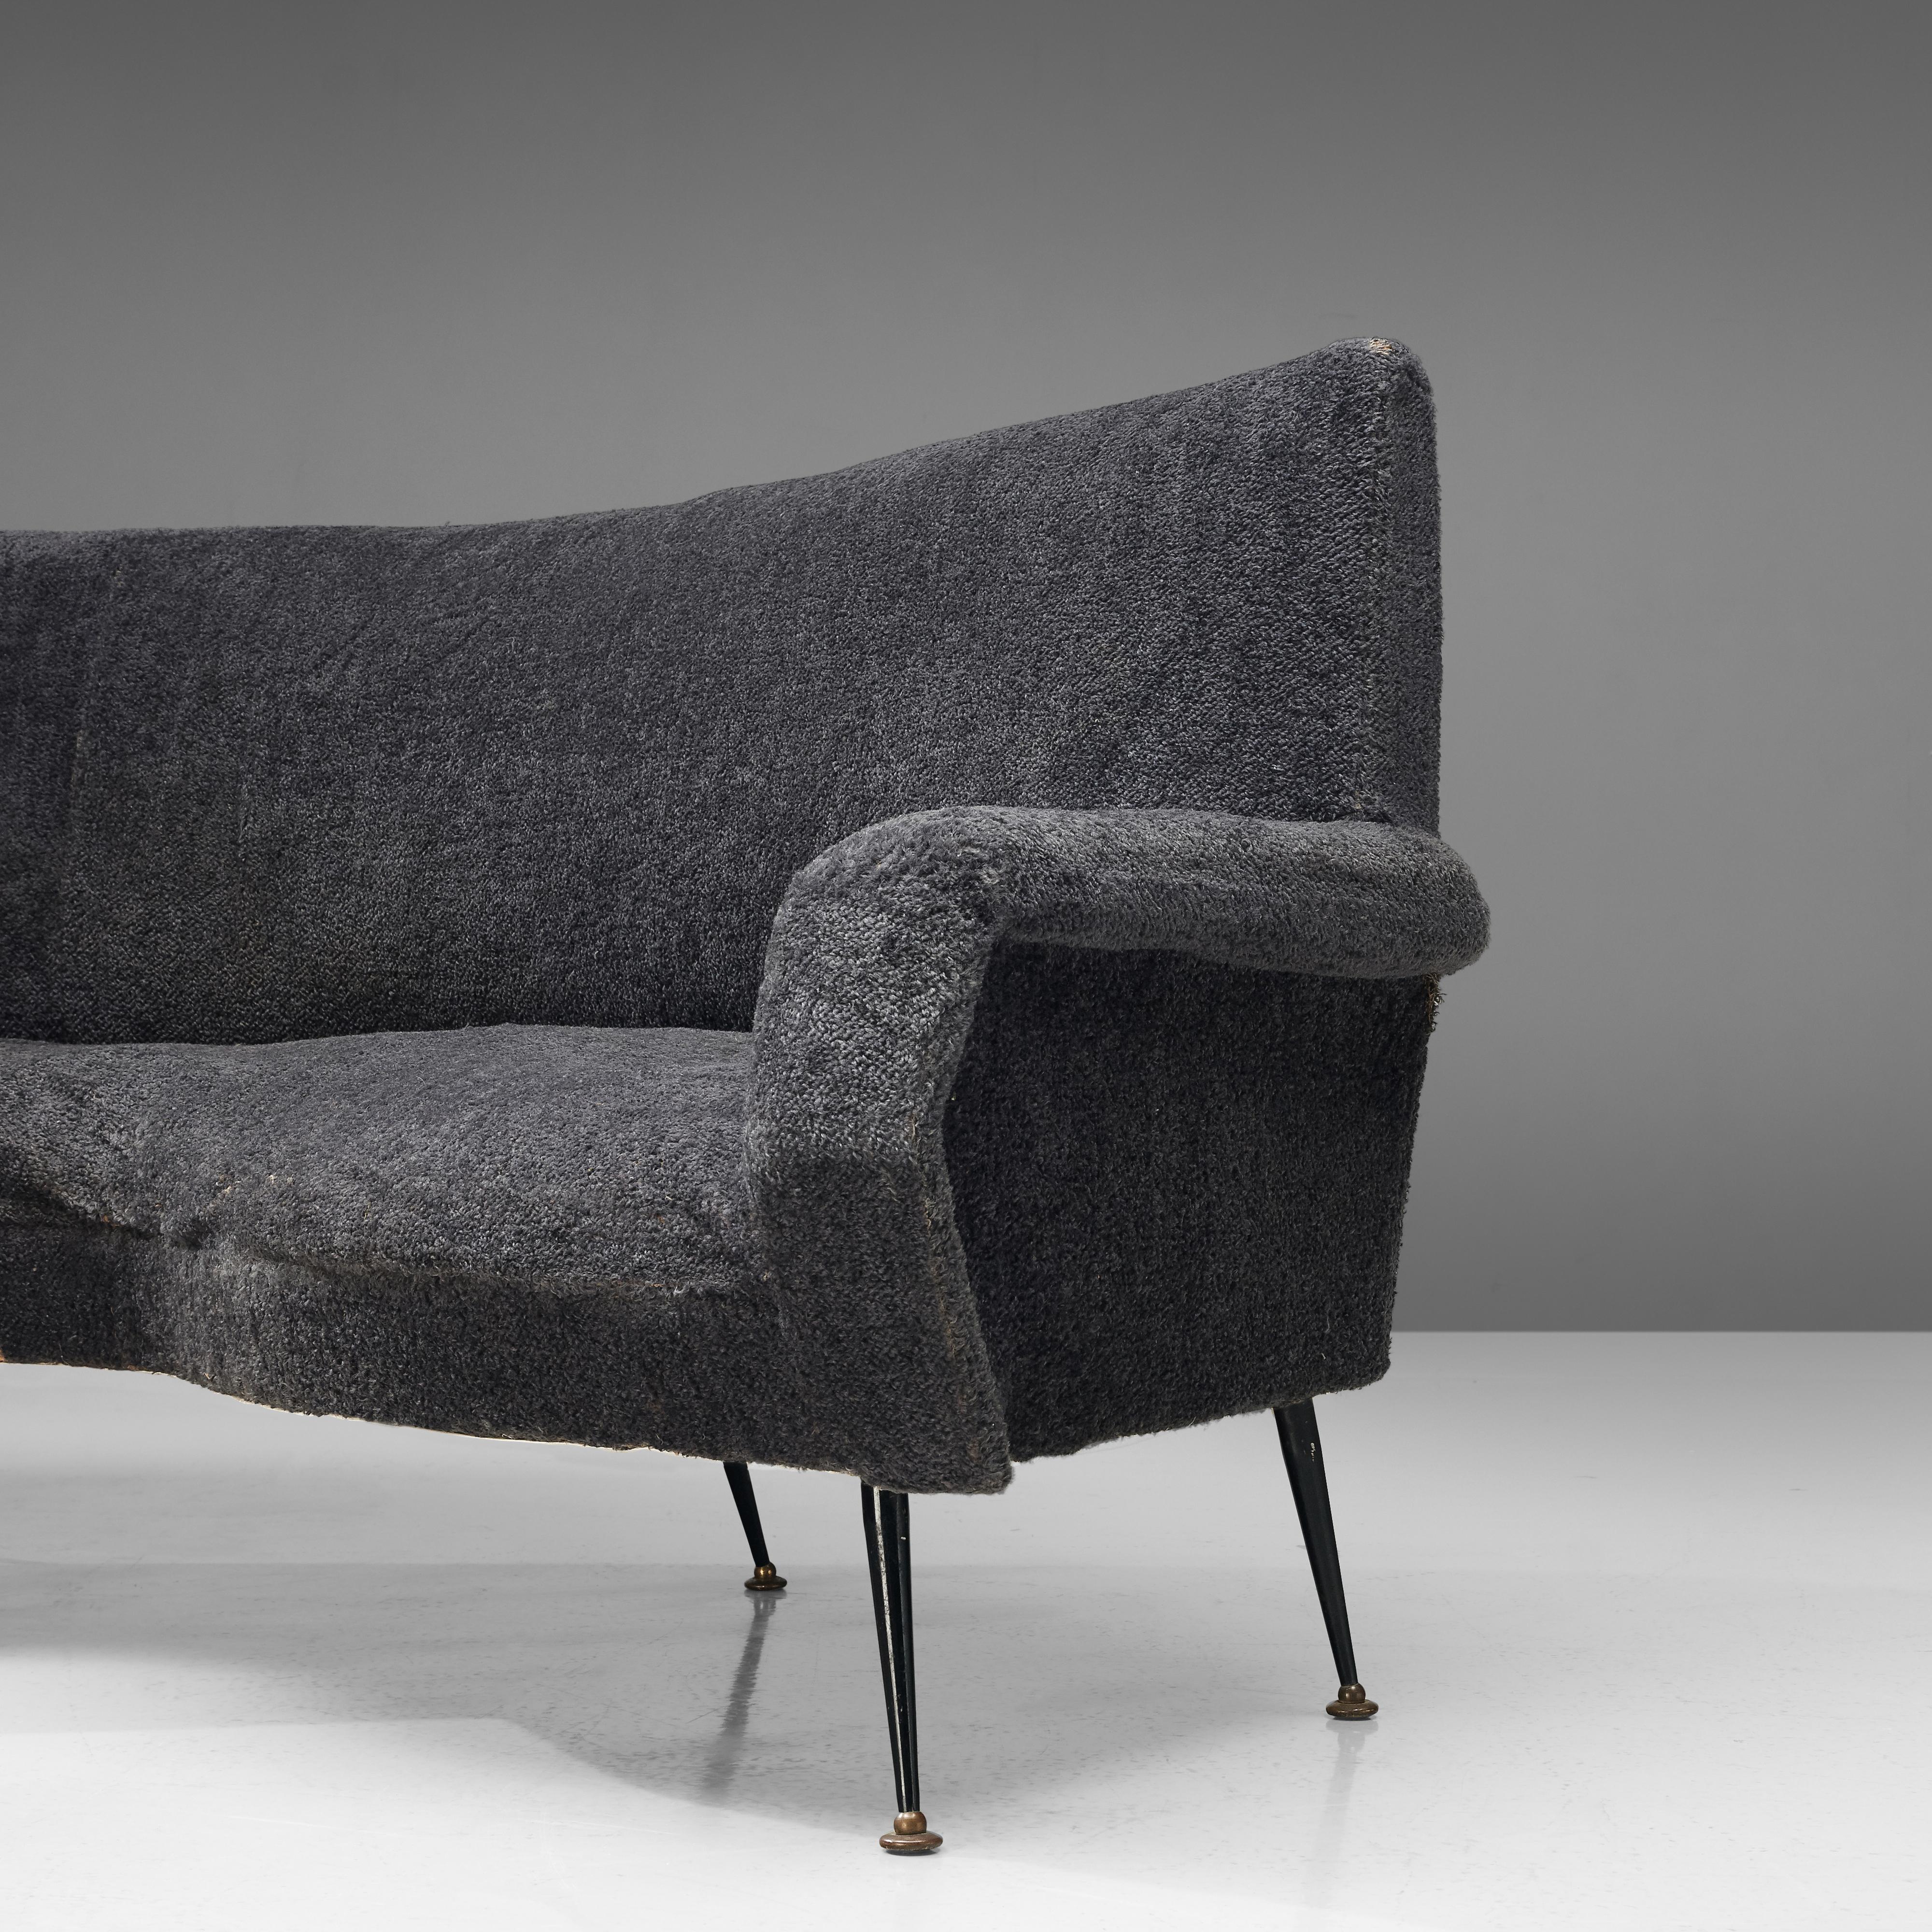 Lacquered Gigi Radice for Minotti Curved Sofa in Grey Upholstery